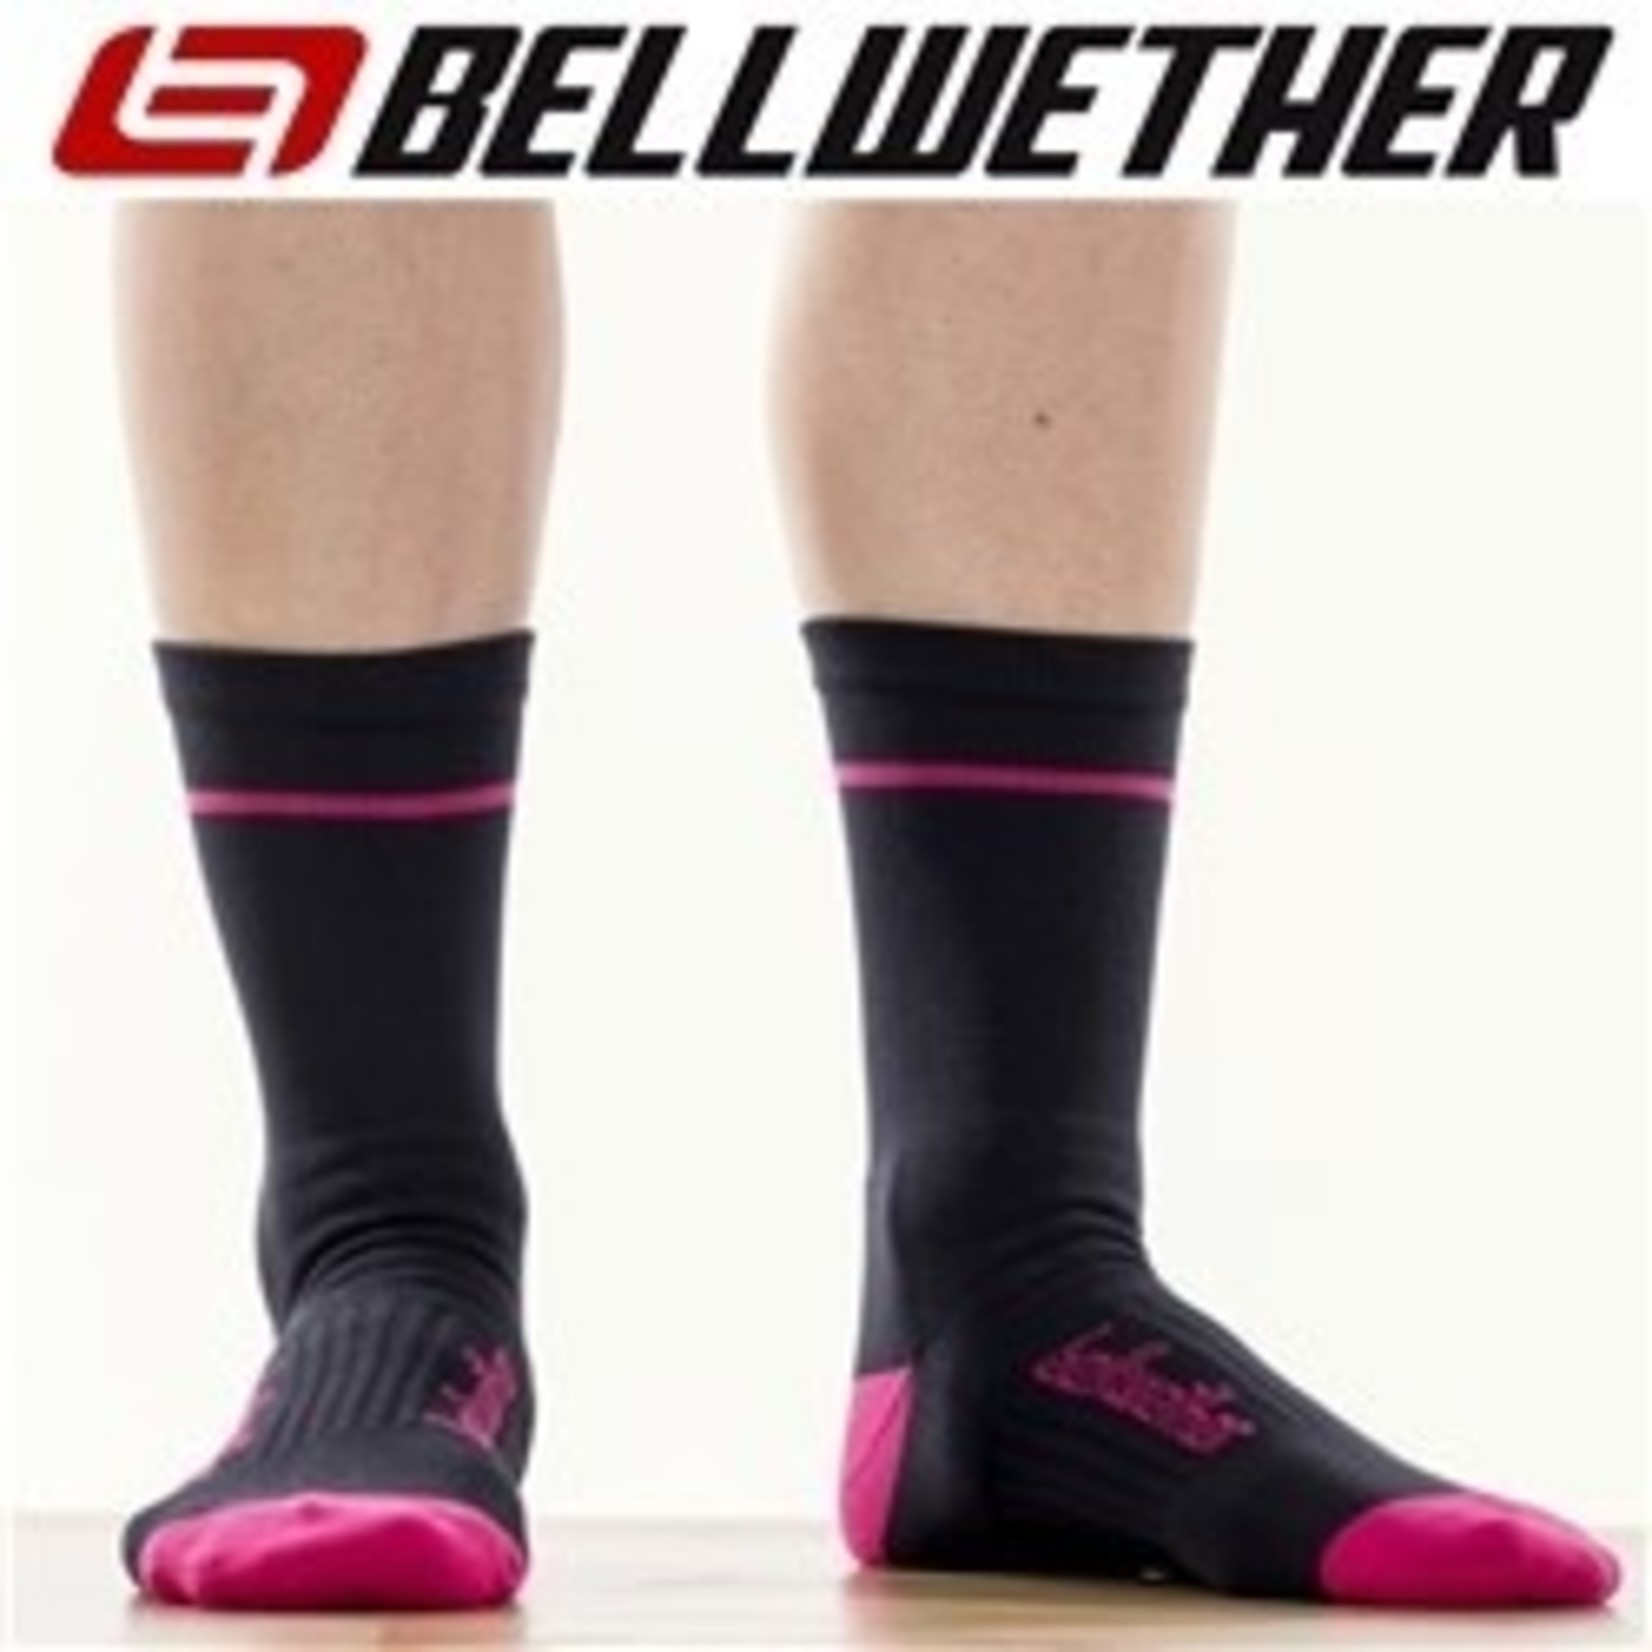 Bellwether Bellwether Cycling Sock - Coolmax - Optime Sock - Black/Berry